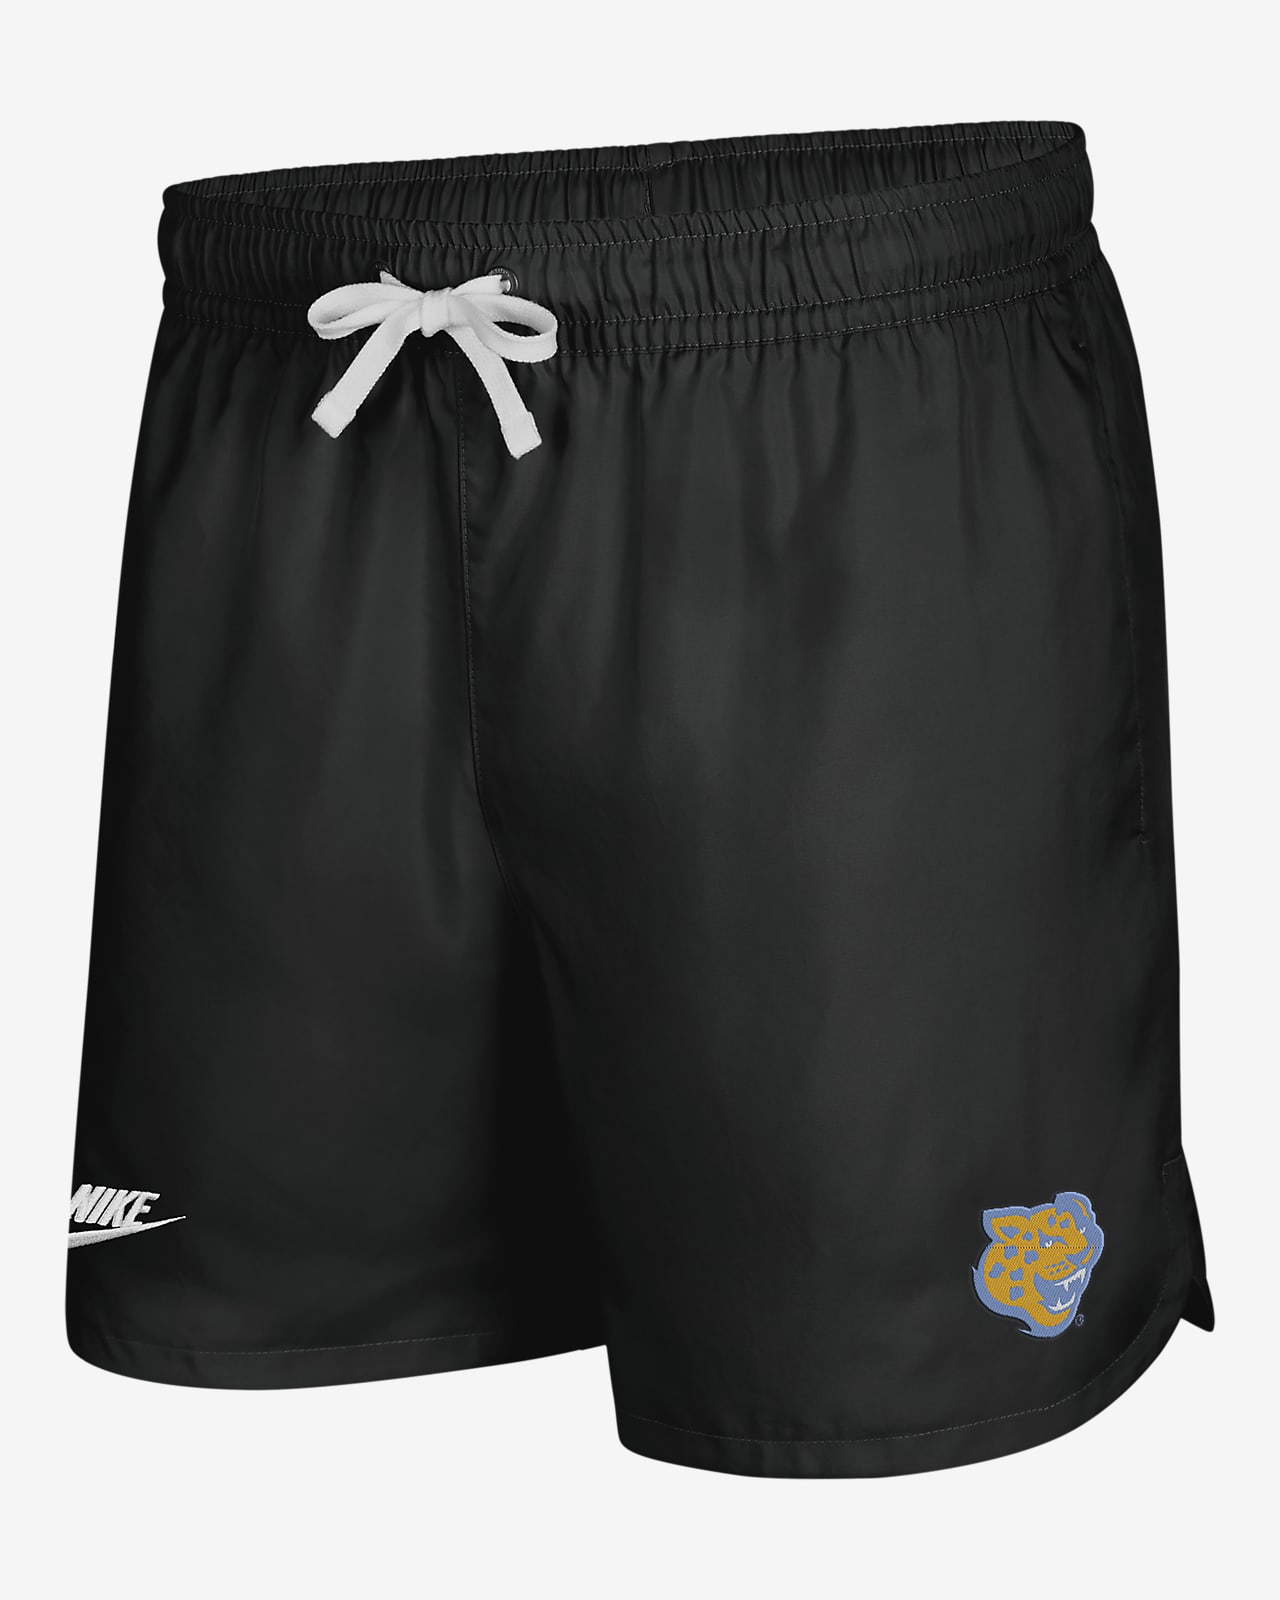 Southern Men's Nike College Flow Shorts